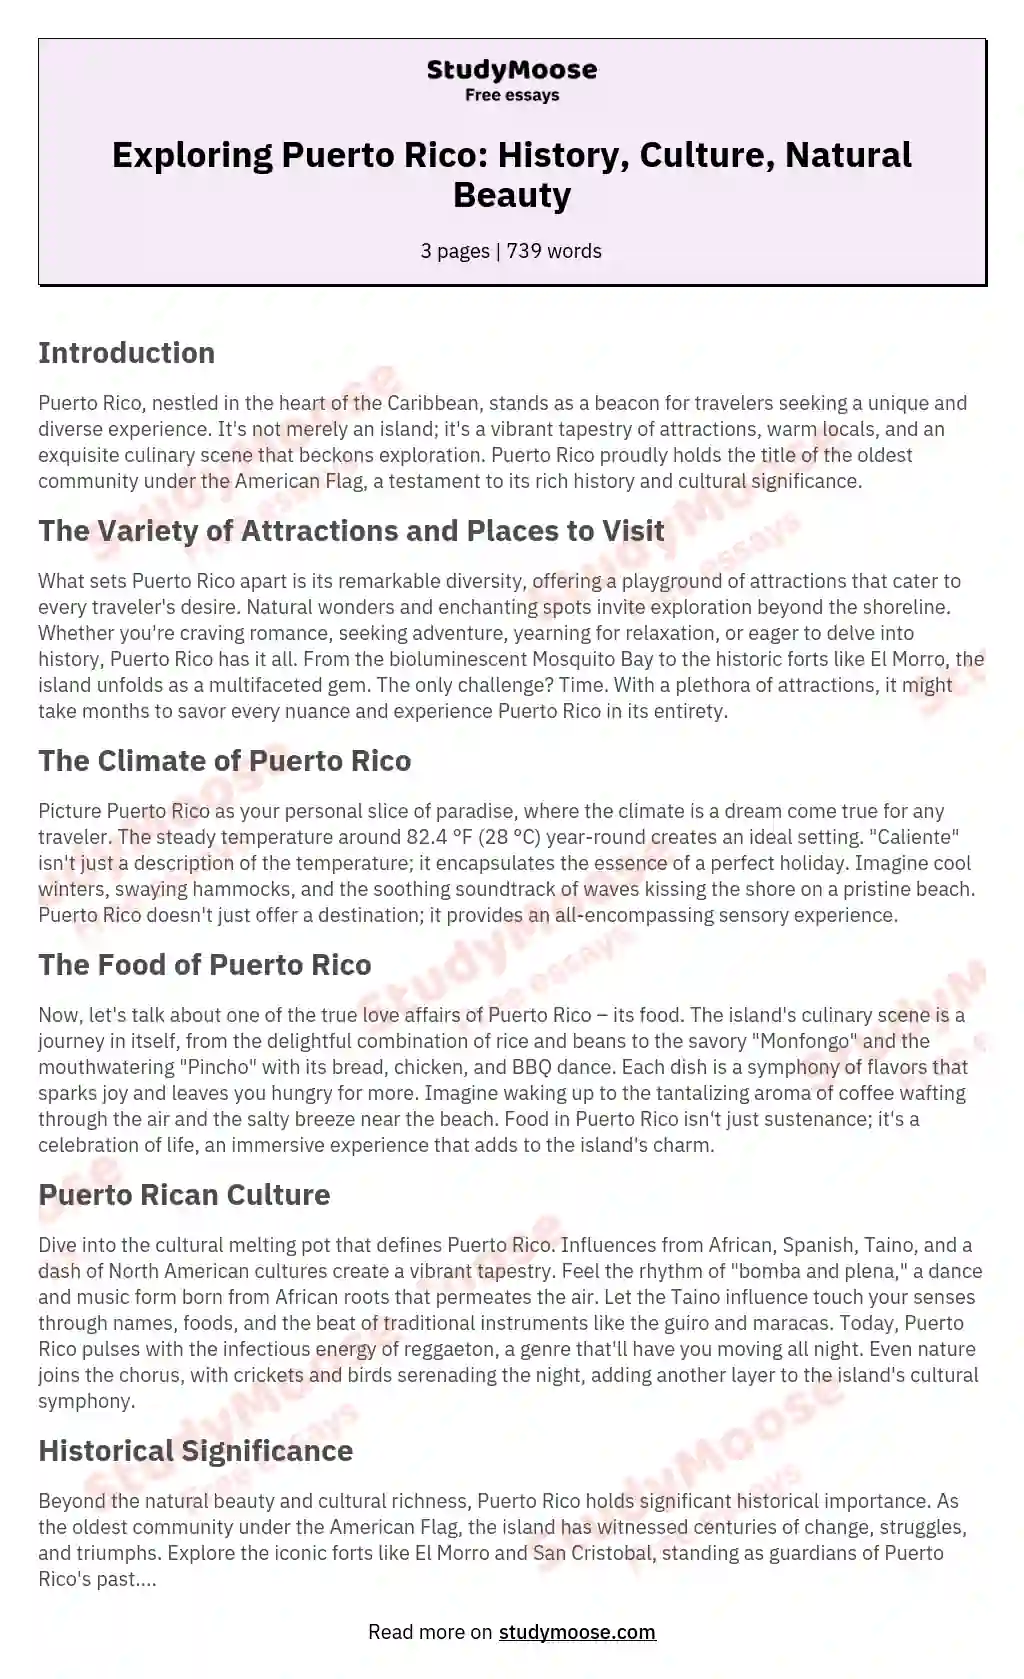 Puerto Rico Perfect for Vacations